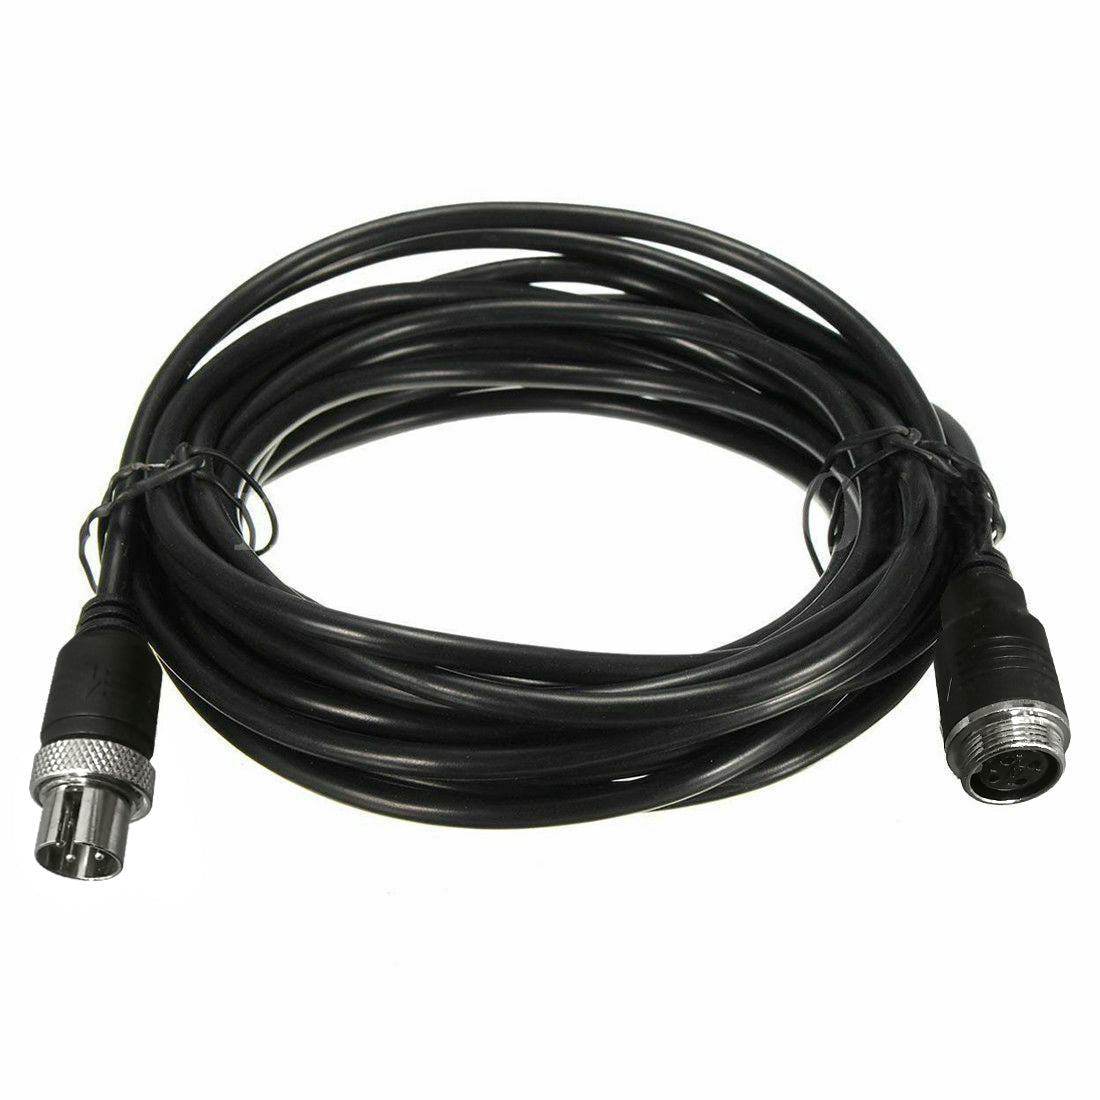 Solar cable extension with MC4 connectors - 5m